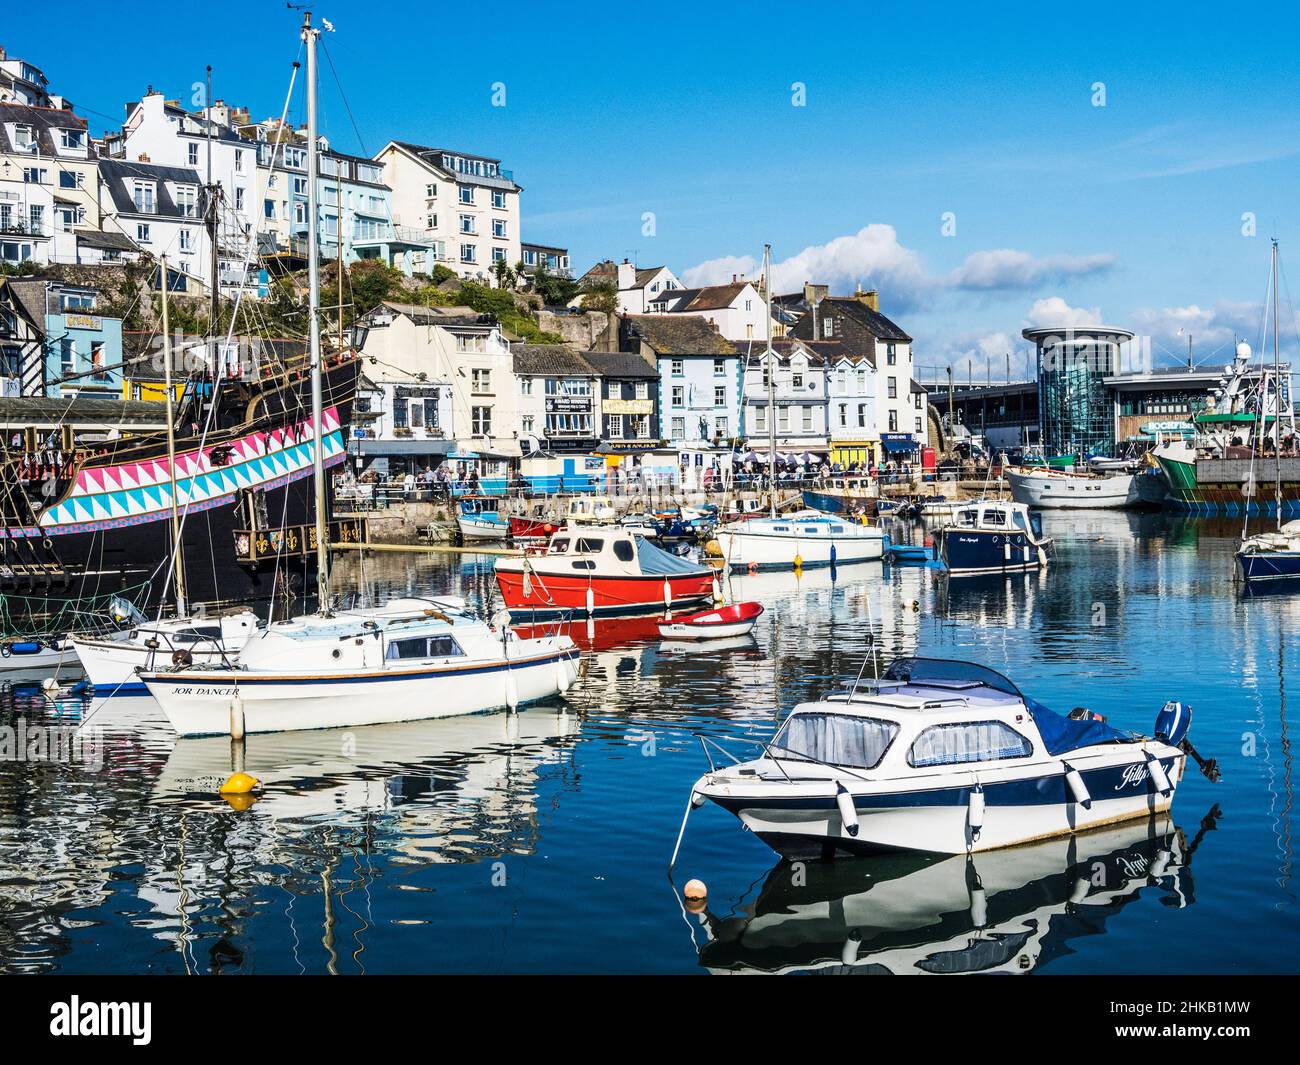 A sunny day at Brixham in south Devon, with the famous Rockfish seafood market and restaurant in the background. Stock Photo